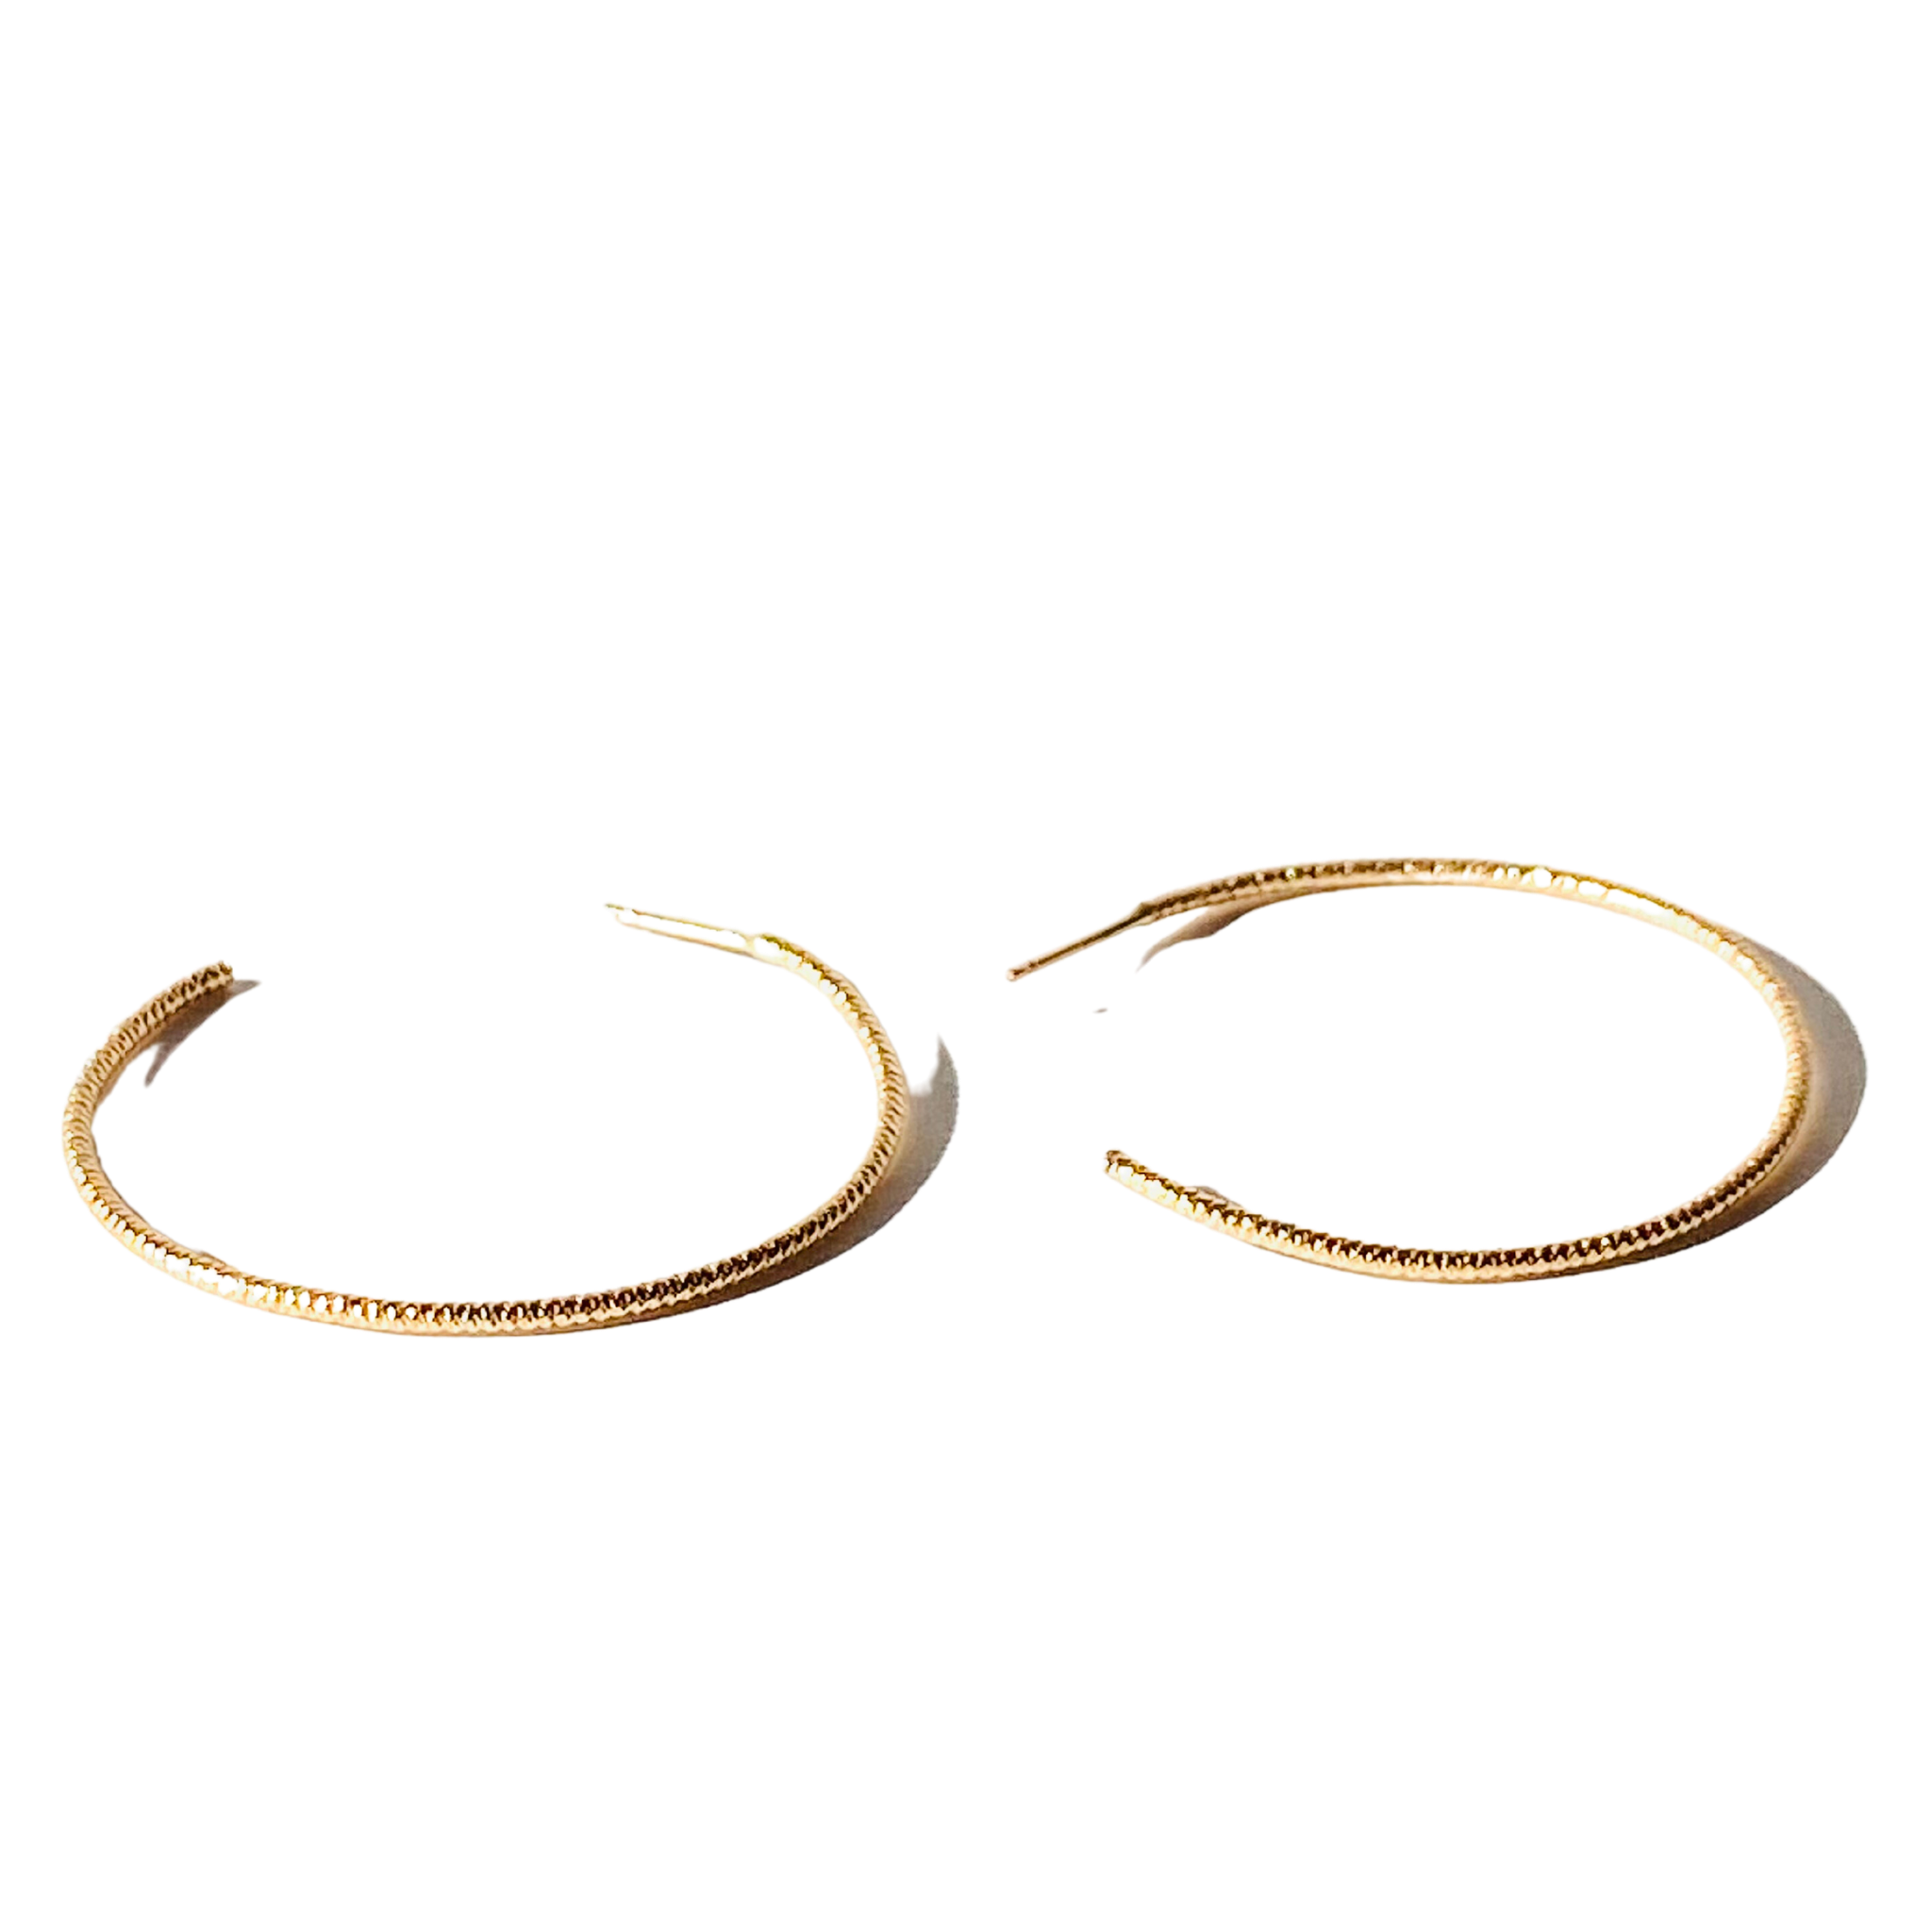 Glitter Large Gold Hoops